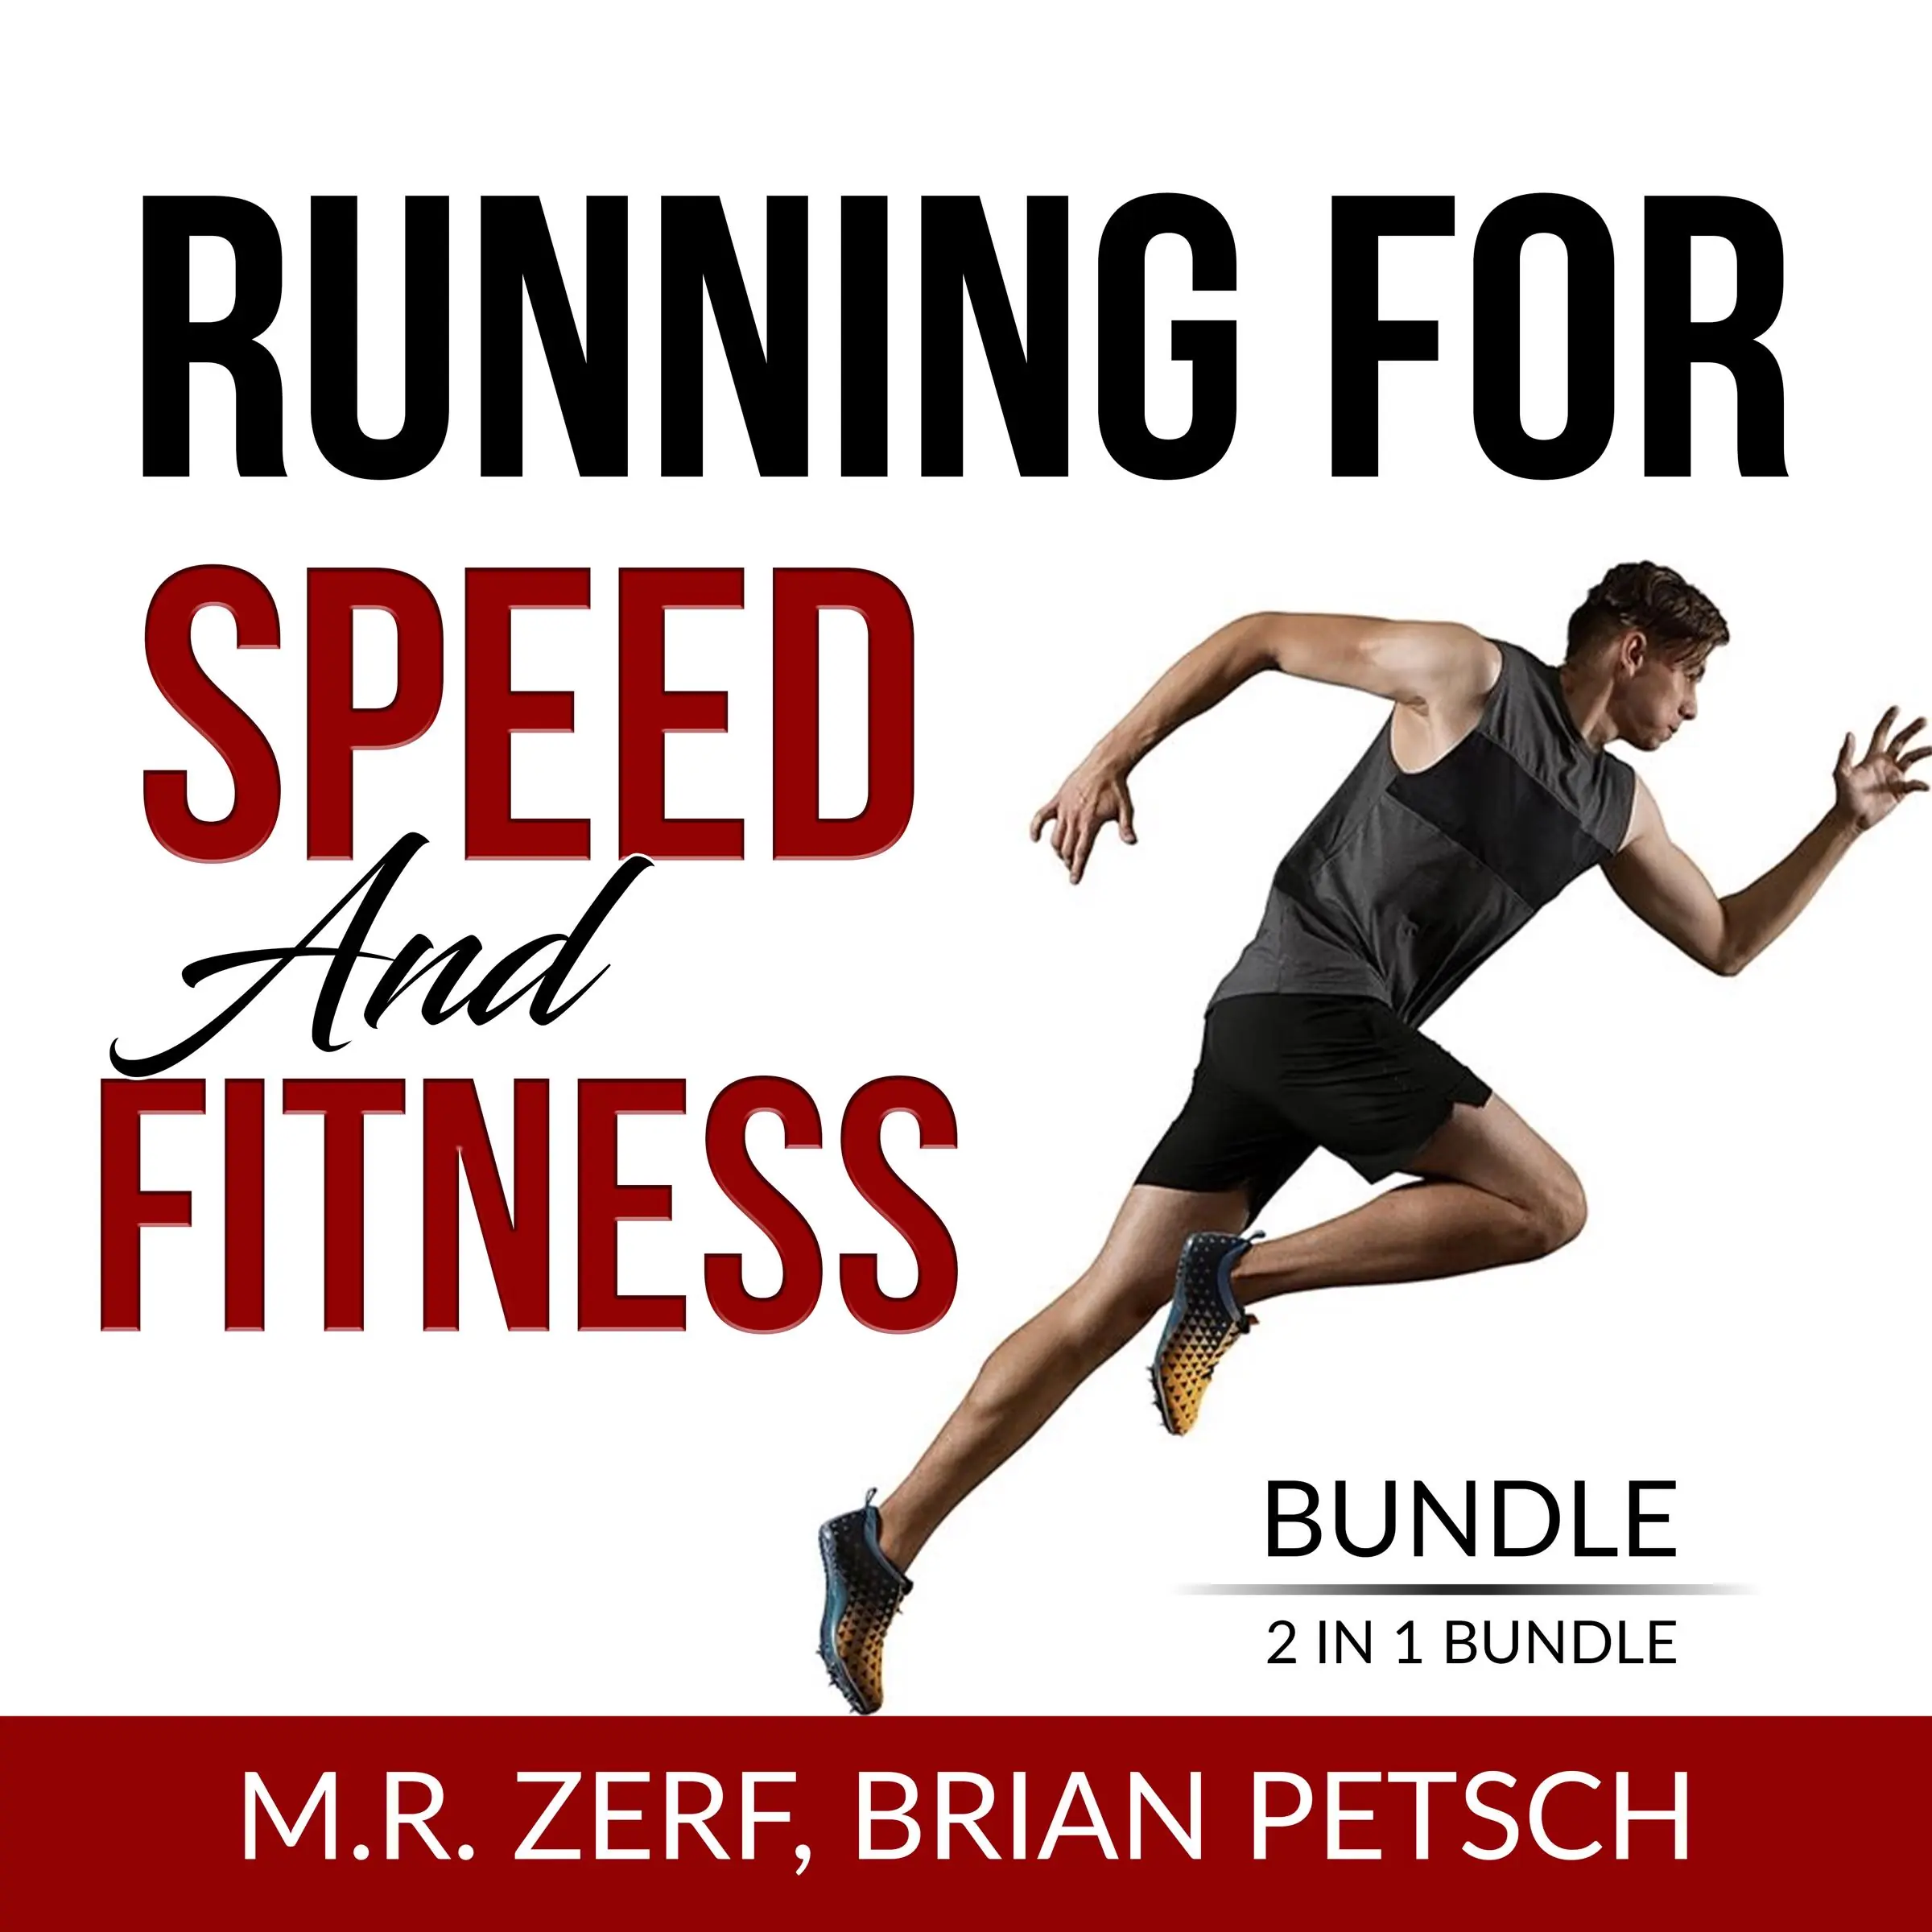 Running For Speed and Fitness Bundle, 2 IN 1 Bundle: 80/20 Running and Run Fast Audiobook by and Brian Petsch